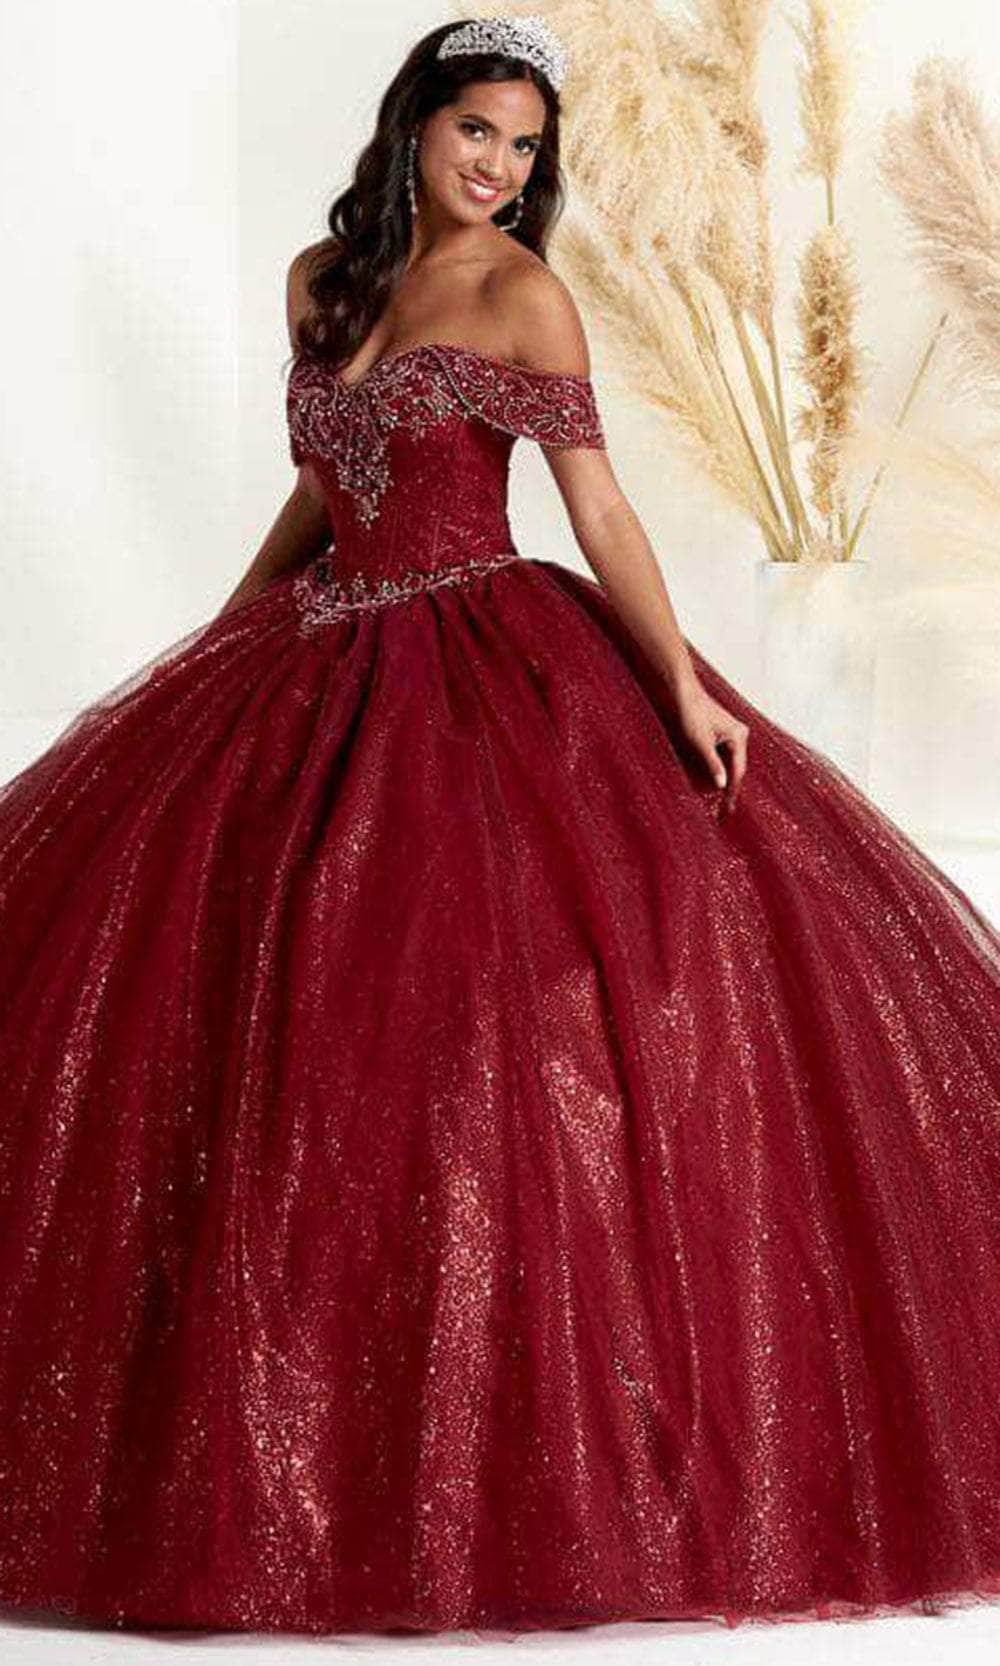 Fiesta Gowns 56451 - Embellished Corset Ballgown Special Occasion Dress